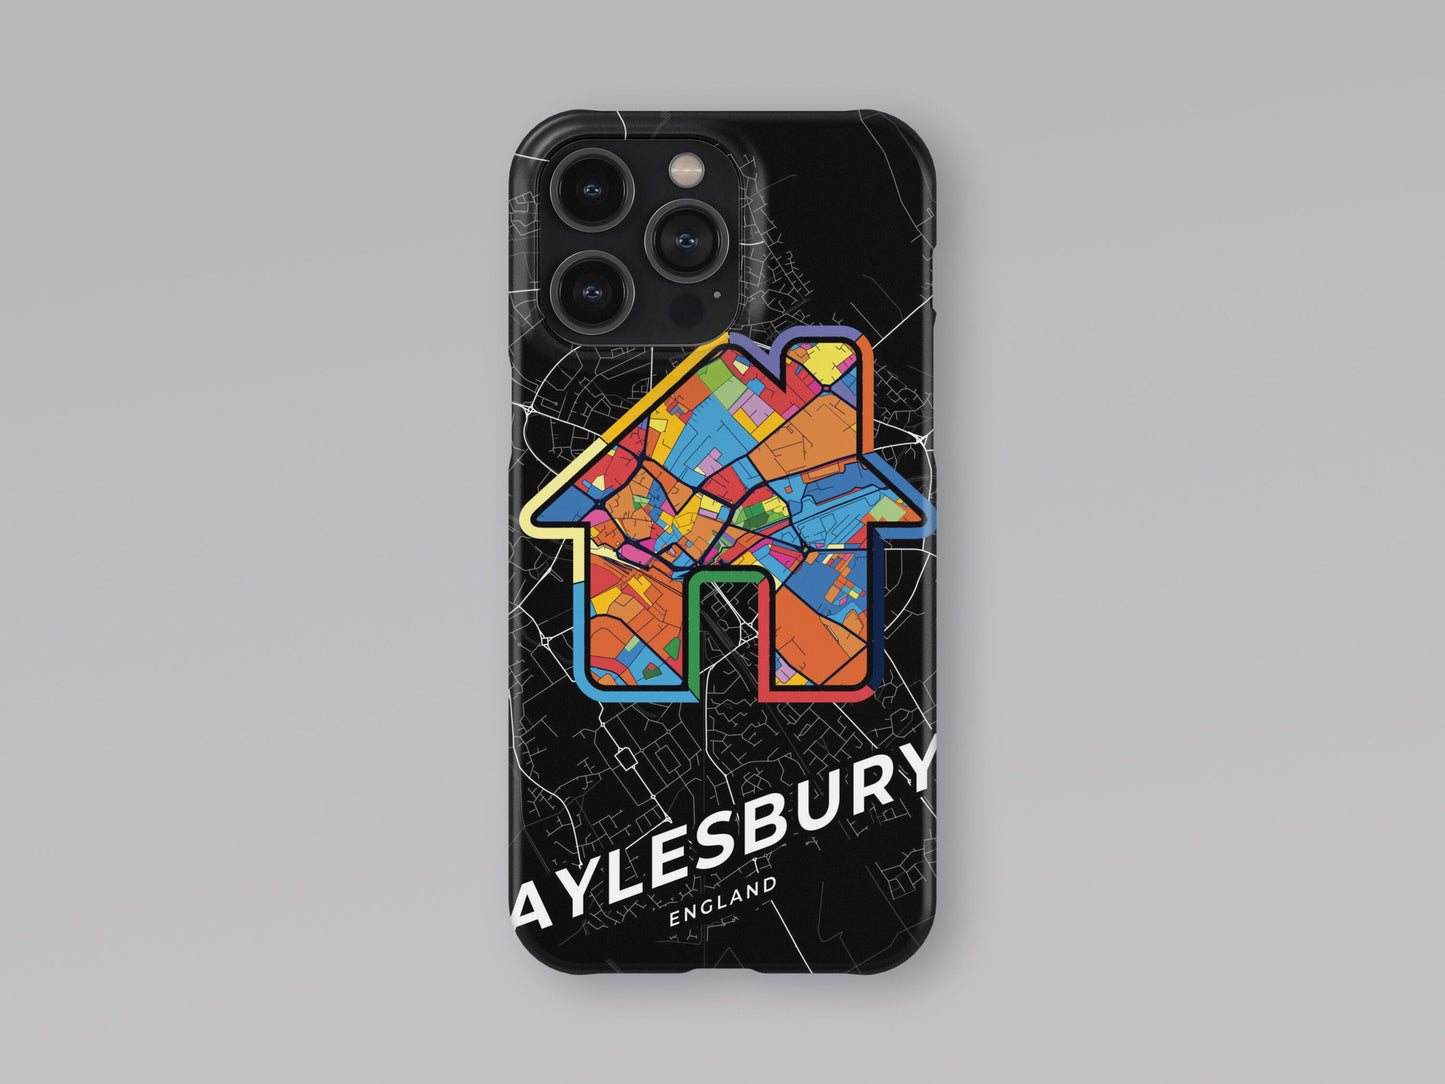 Aylesbury England slim phone case with colorful icon. Birthday, wedding or housewarming gift. Couple match cases. 3